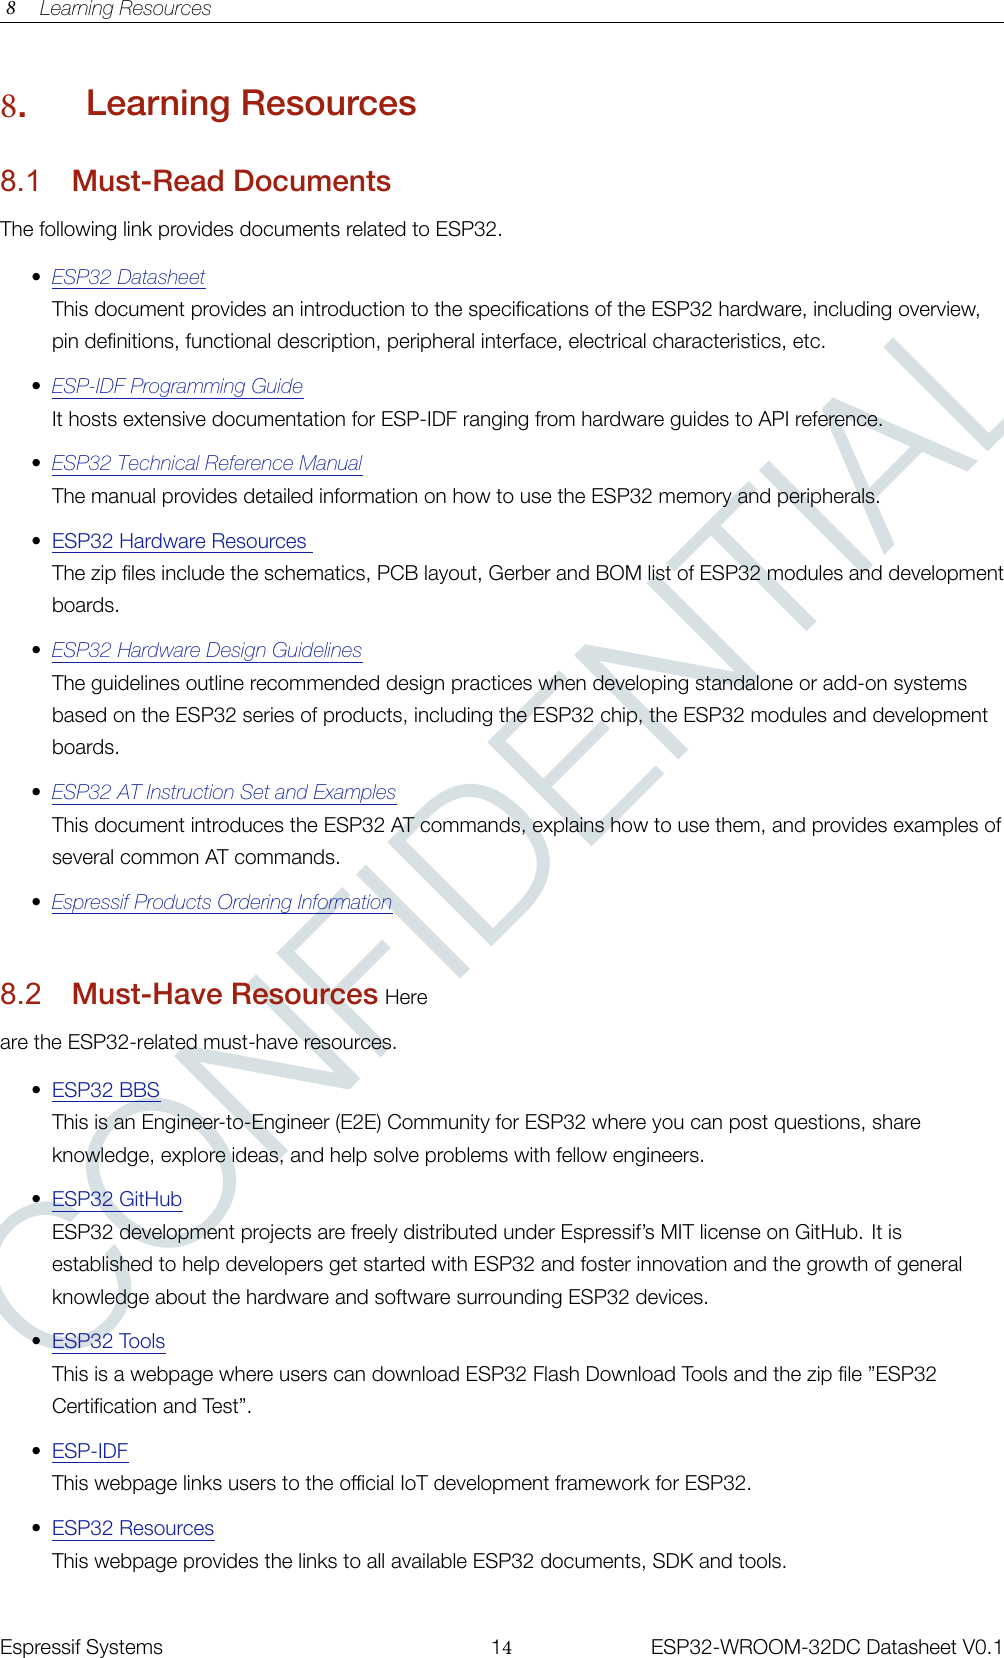 CONFIDENTIAL8 Learning Resources8.Learning Resources8.1 Must-Read DocumentsThe following link provides documents related to ESP32.•ESP32 DatasheetThis document provides an introduction to the specifications of the ESP32 hardware, including overview,pin definitions, functional description, peripheral interface, electrical characteristics, etc.•ESP-IDF Programming GuideIt hosts extensive documentation for ESP-IDF ranging from hardware guides to API reference.•ESP32 Technical Reference ManualThe manual provides detailed information on how to use the ESP32 memory and peripherals.•ESP32 Hardware ResourcesThe zip files include the schematics, PCB layout, Gerber and BOM list of ESP32 modules and developmentboards.•ESP32 Hardware Design GuidelinesThe guidelines outline recommended design practices when developing standalone or add-on systemsbased on the ESP32 series of products, including the ESP32 chip, the ESP32 modules and developmentboards.•ESP32 AT Instruction Set and ExamplesThis document introduces the ESP32 AT commands, explains how to use them, and provides examples ofseveral common AT commands.•Espressif Products Ordering Information8.2 Must-Have Resources Hereare the ESP32-related must-have resources.•ESP32 BBSThis is an Engineer-to-Engineer (E2E) Community for ESP32 where you can post questions, shareknowledge, explore ideas, and help solve problems with fellow engineers.•ESP32 GitHubESP32 development projects are freely distributed under Espressif’s MIT license on GitHub. It isestablished to help developers get started with ESP32 and foster innovation and the growth of generalknowledge about the hardware and software surrounding ESP32 devices.•ESP32 ToolsThis is a webpage where users can download ESP32 Flash Download Tools and the zip file ”ESP32Certification and Test”.•ESP-IDFThis webpage links users to the official IoT development framework for ESP32.•ESP32 ResourcesThis webpage provides the links to all available ESP32 documents, SDK and tools. �����������Espressif Systems 14ESP32-WROOM-32DC Datasheet V0.1